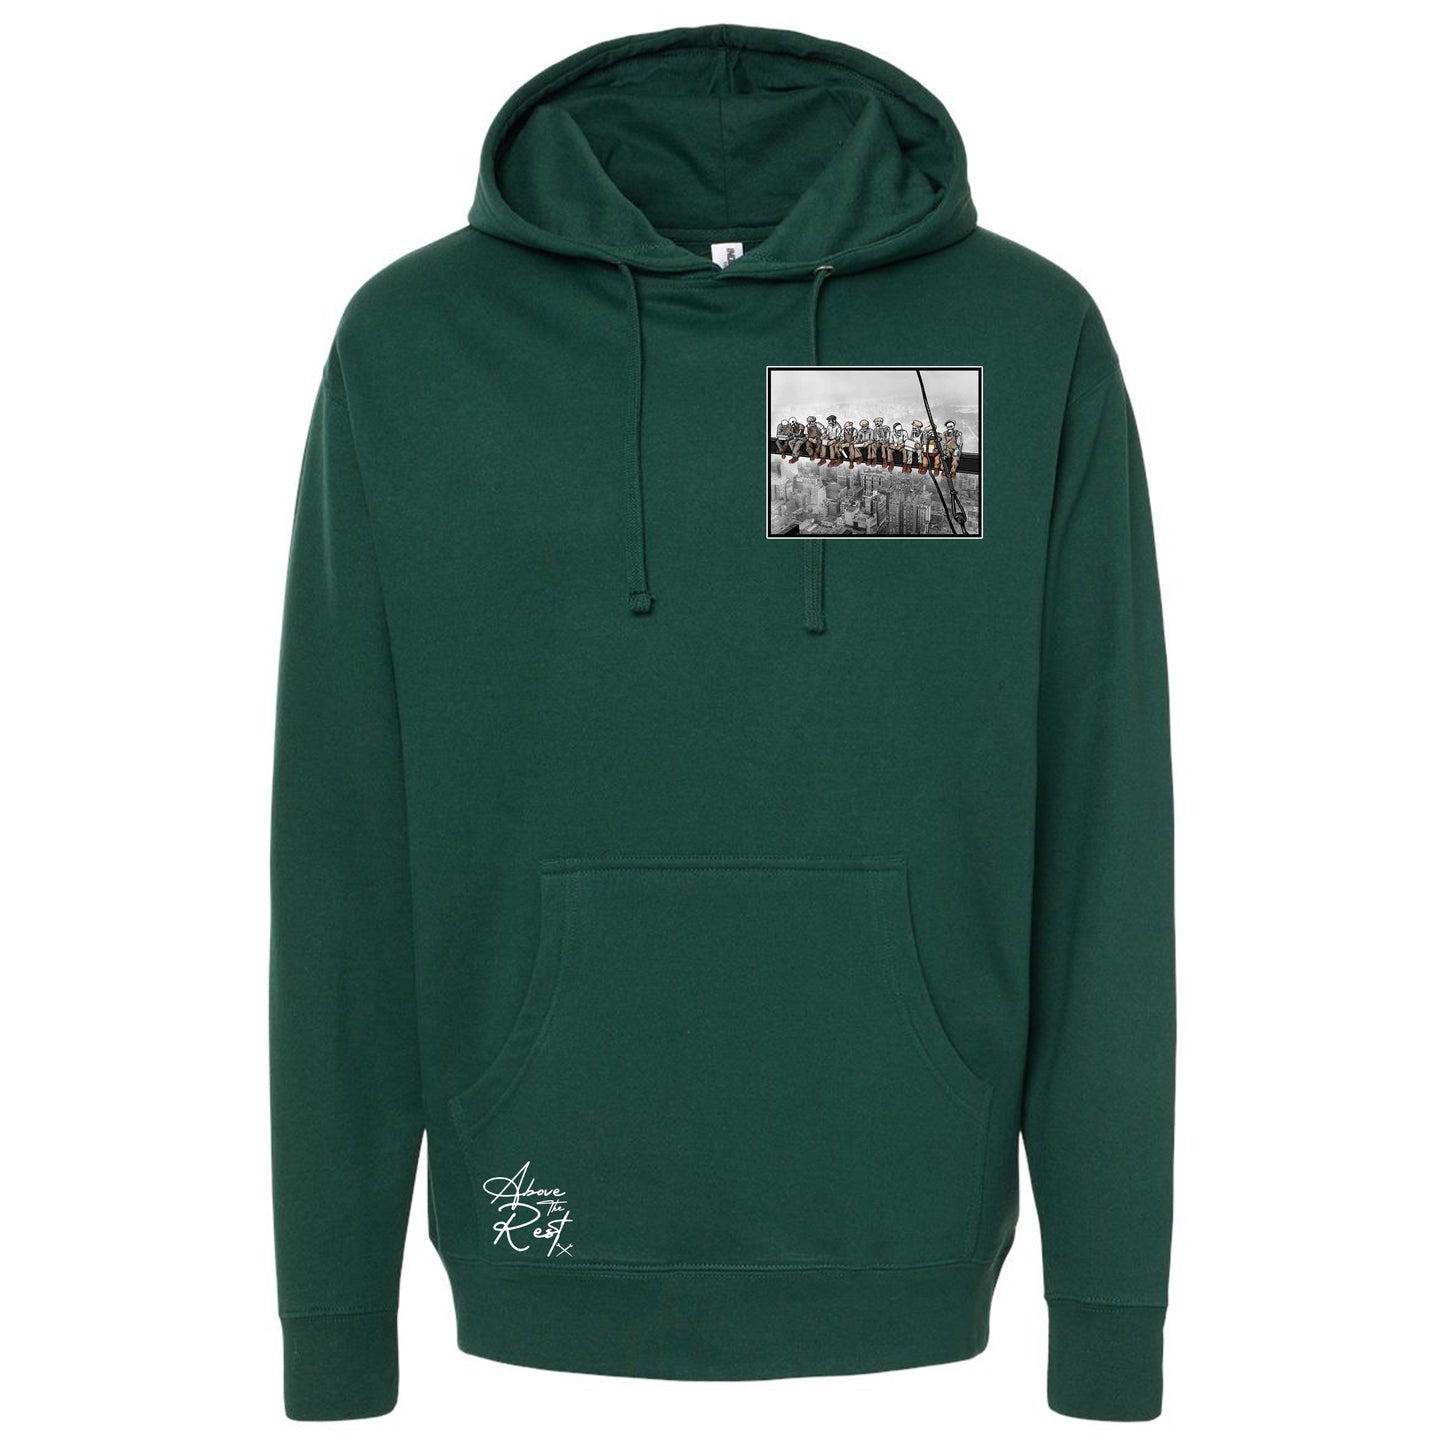 LUNCH ON BEAM PULLOVER HOODIE